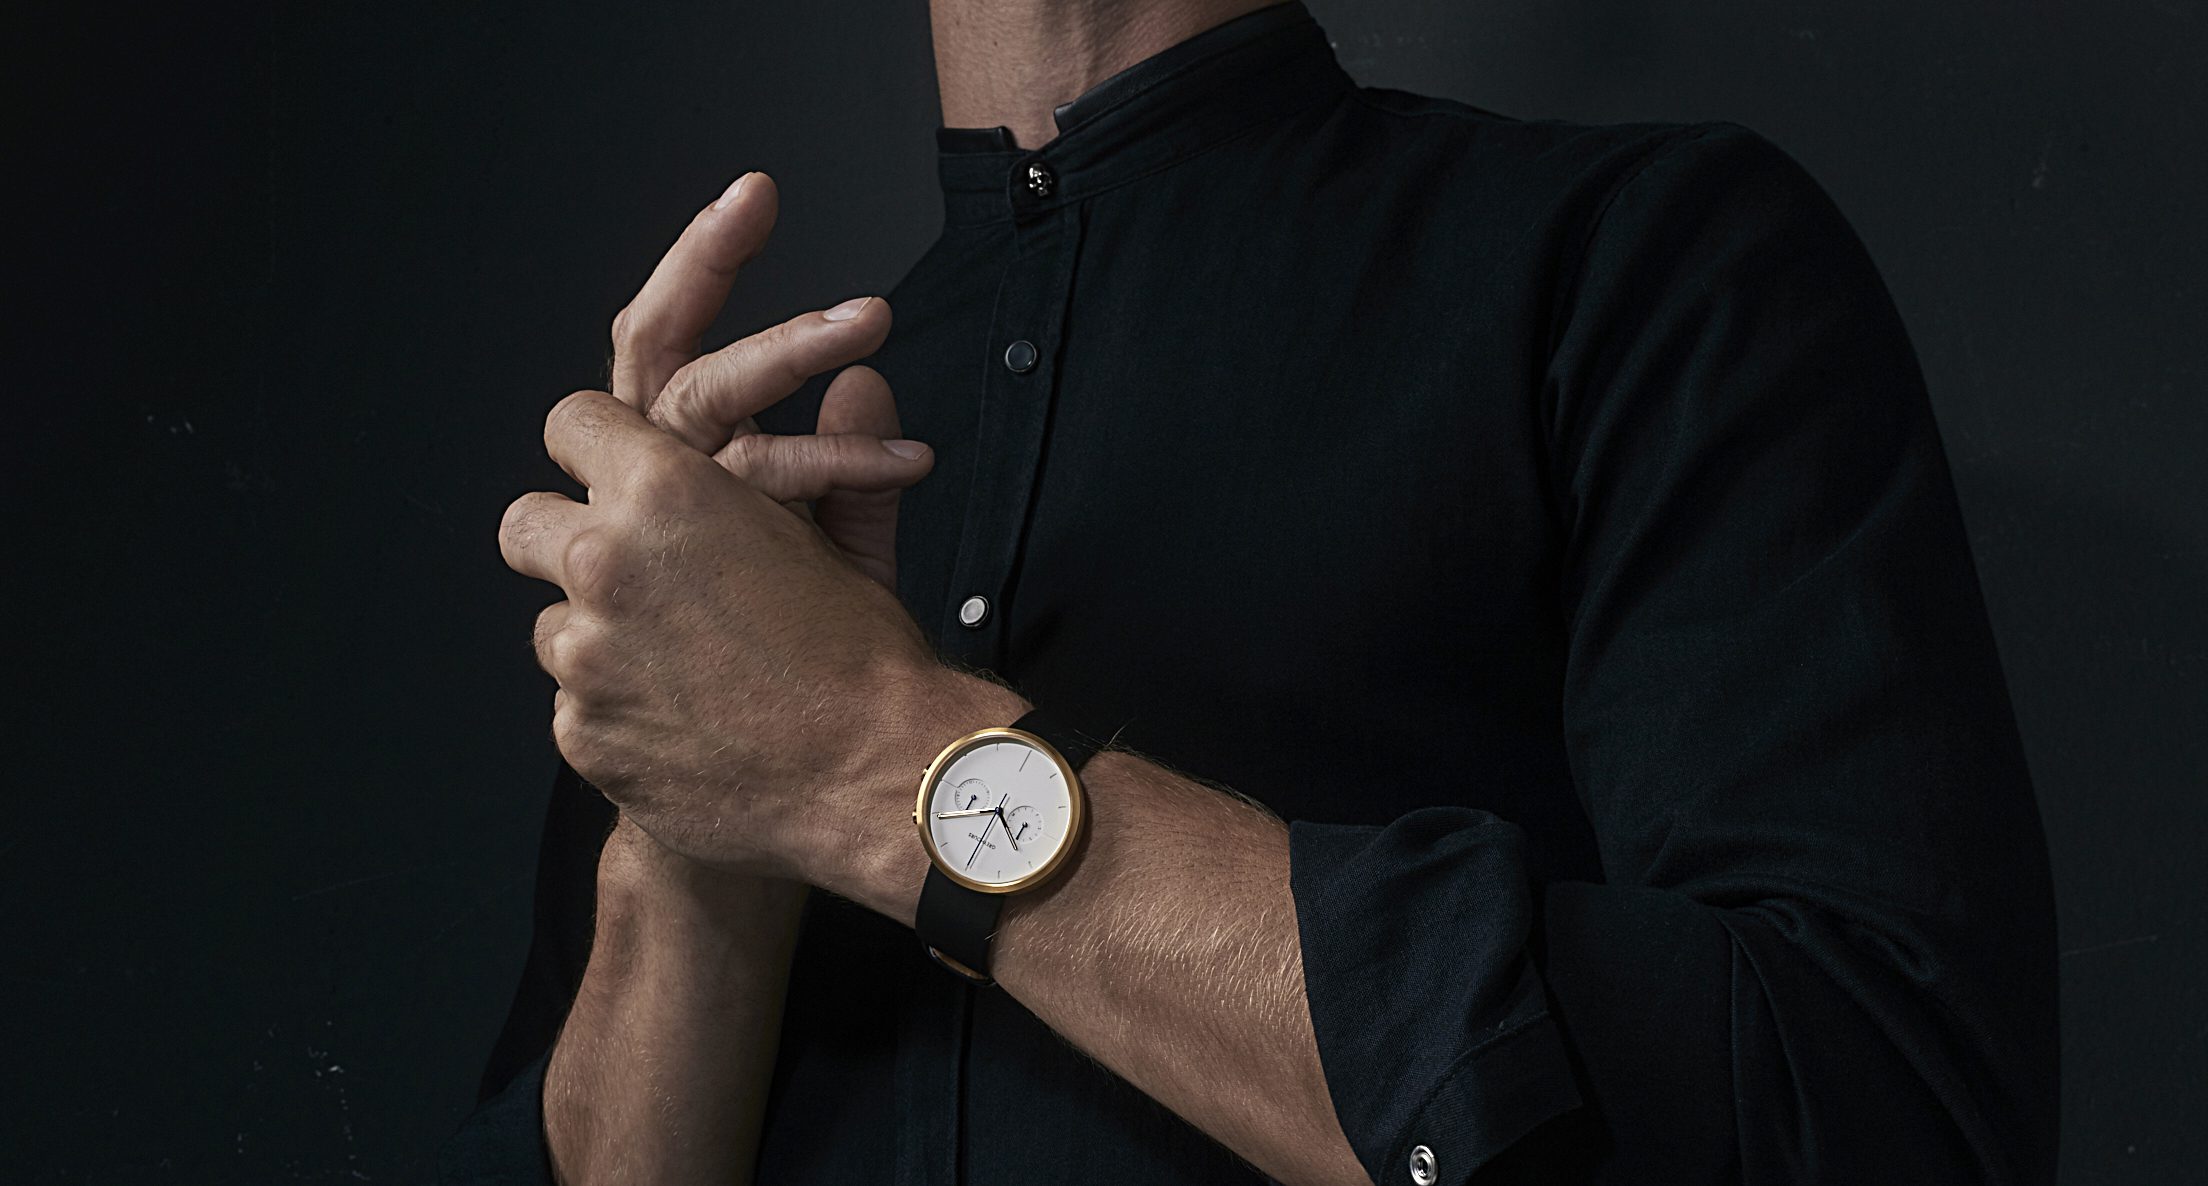 The affordable autumn watches you need right now | The Gentleman's Journal  | Gentleman's Journal